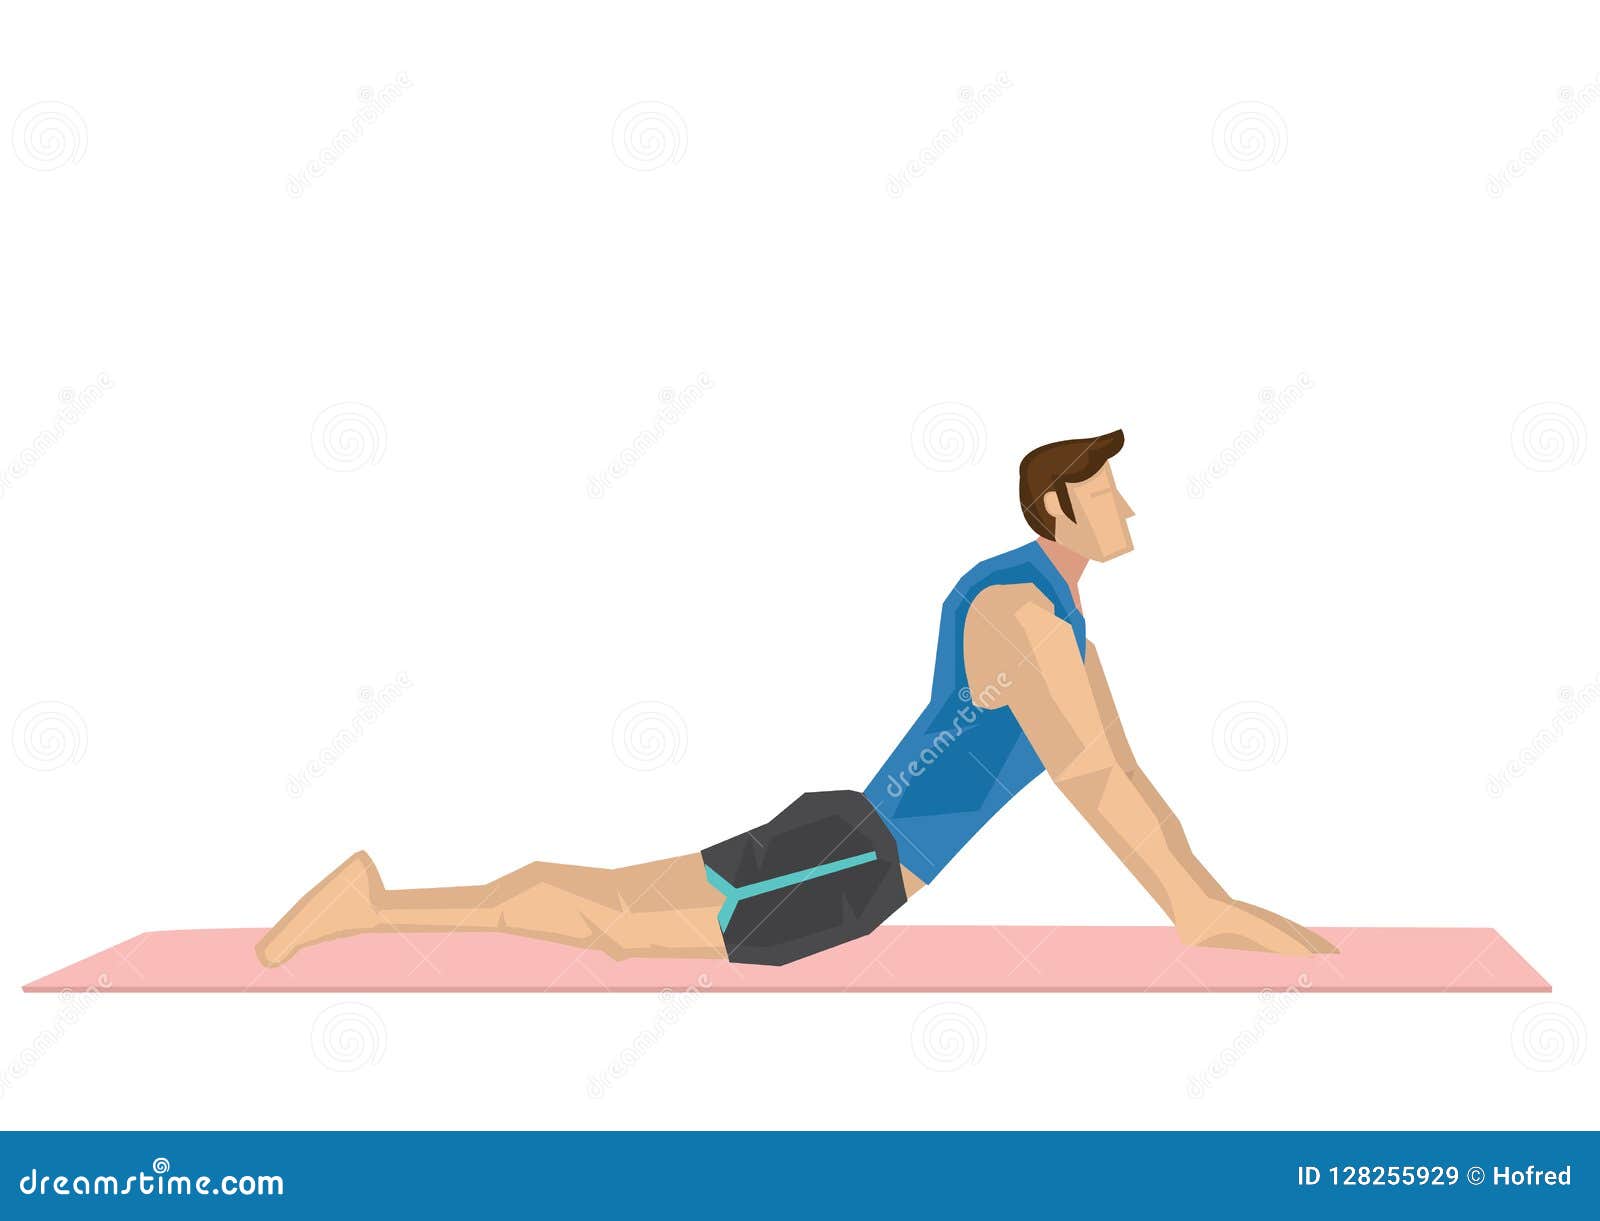 Illustration of a Strong Man Practicing Yoga with a Cobra Pose. Stock ...